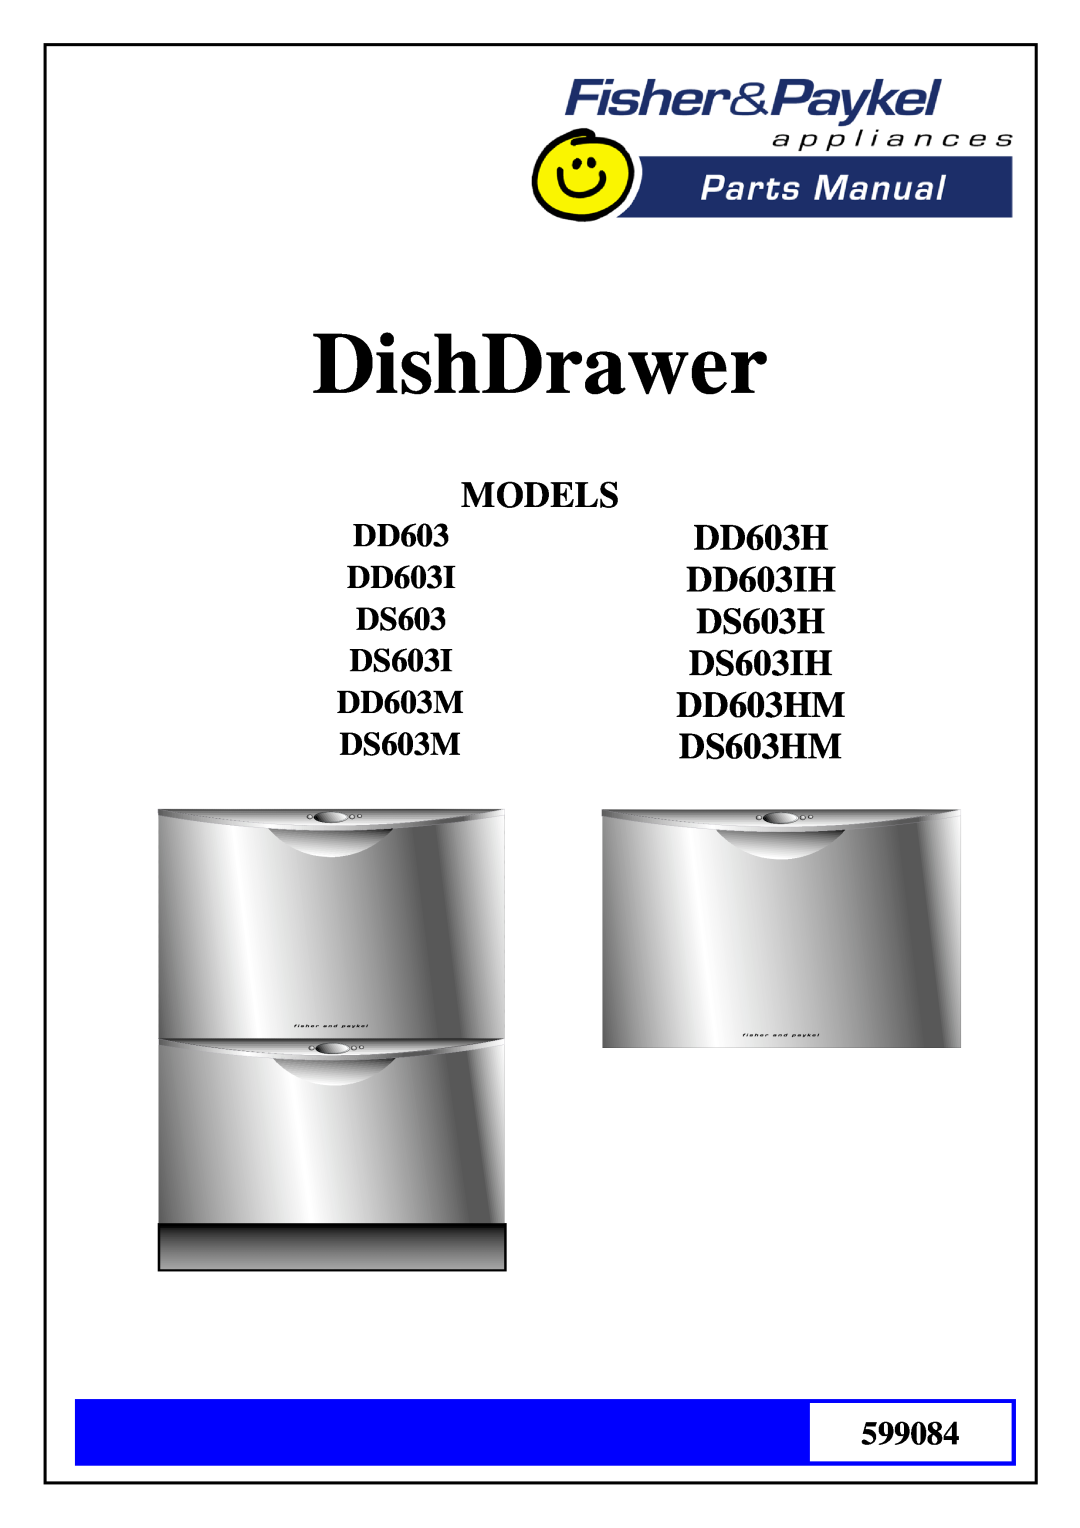 Fisher & Paykel DS603 I manual 599082, Models, DD603IH, DS603H, DS603IH, DD603HM, DS603M, DD603M 